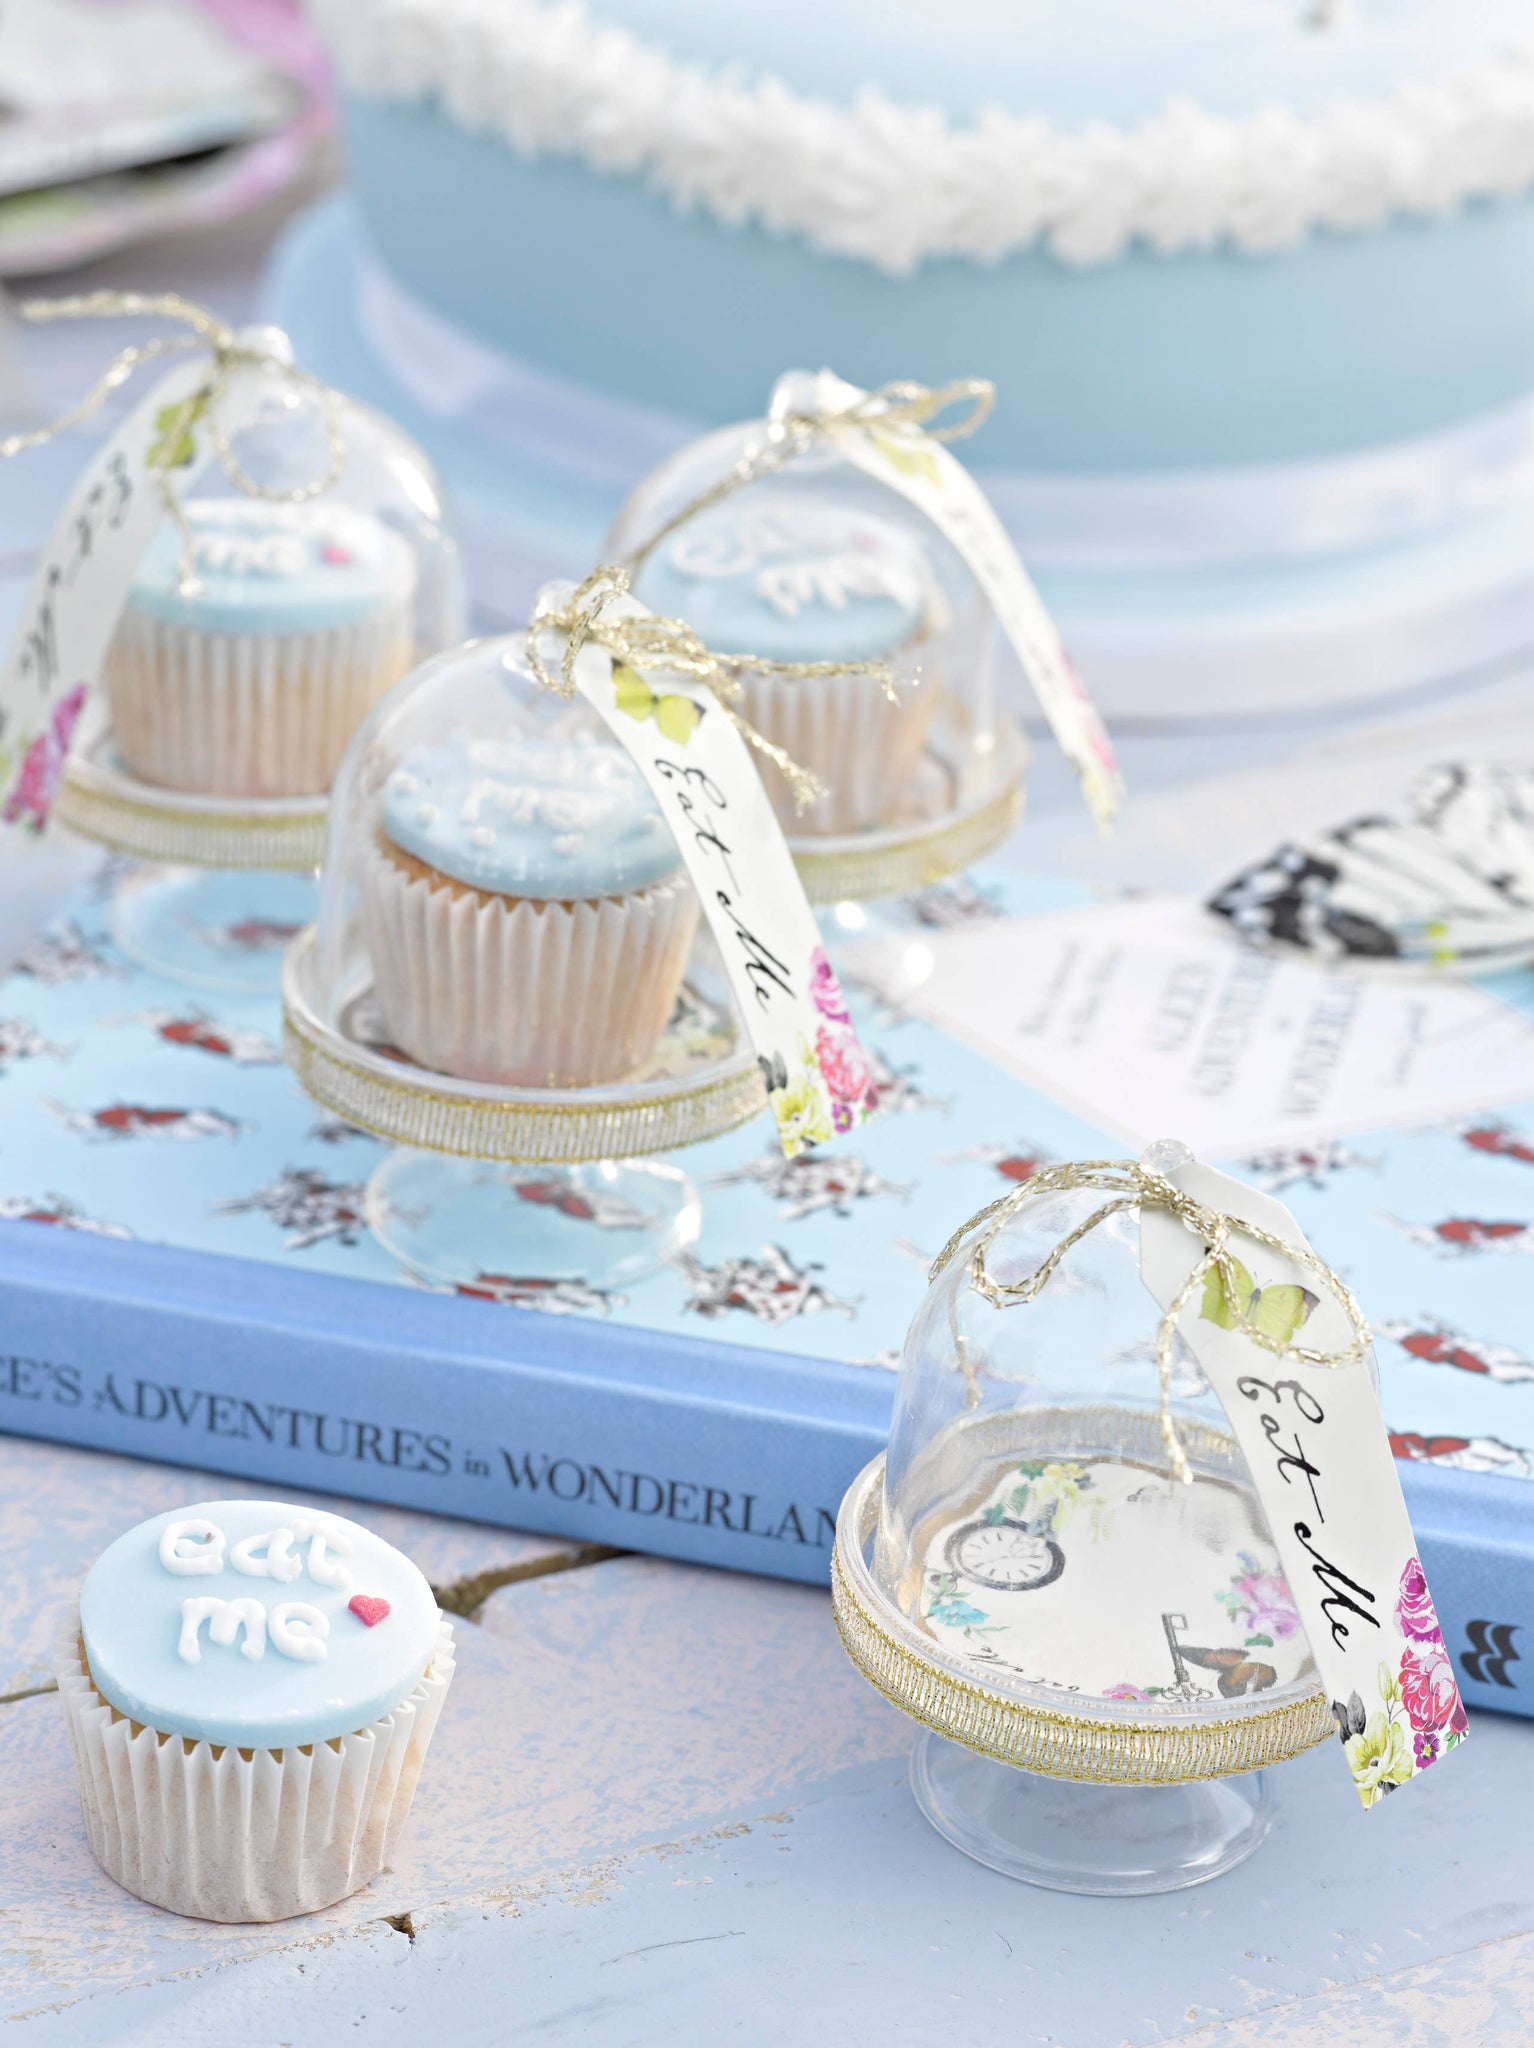 Truly Alice Party Favor Mini Cake Domes - 6 Pack